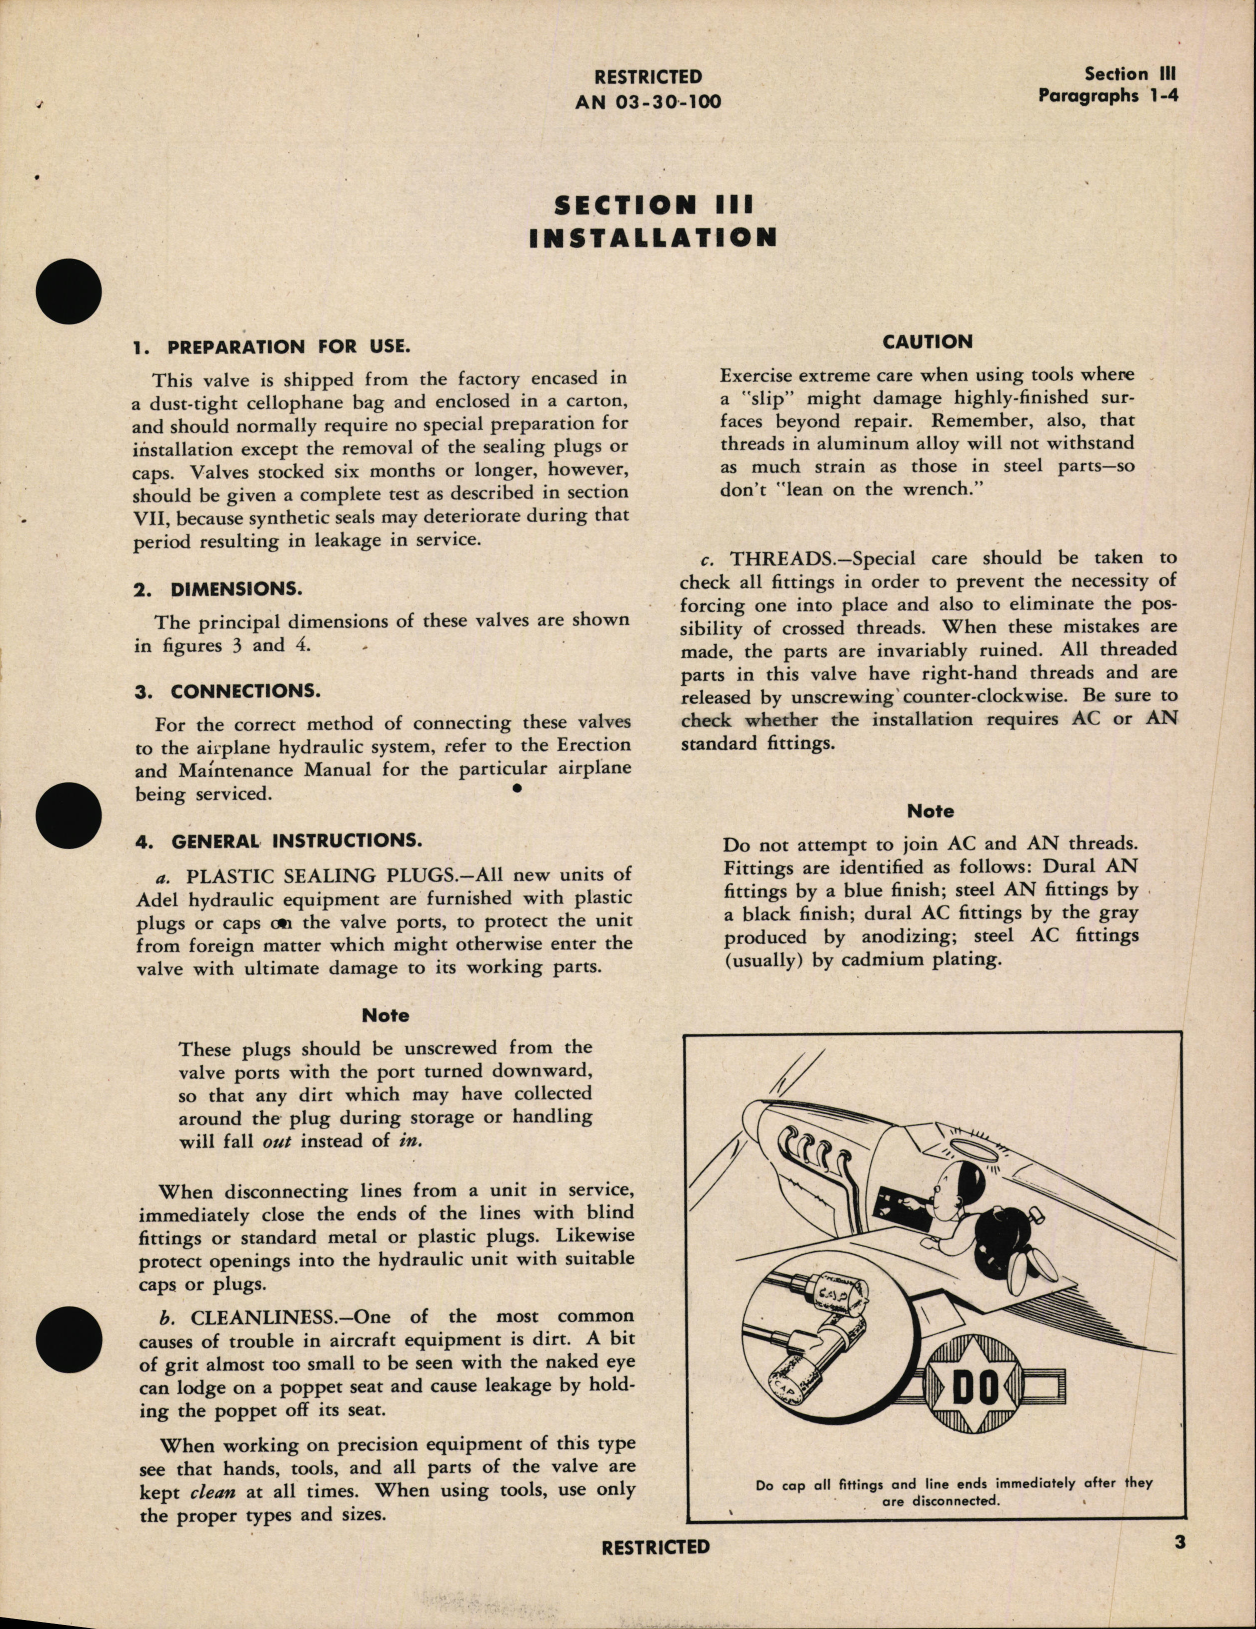 Sample page 7 from AirCorps Library document: Handbook of Instructions with Parts Catalog for Steel Seat Hydraulic Manually Operated Check (Shut-Off) Valves 